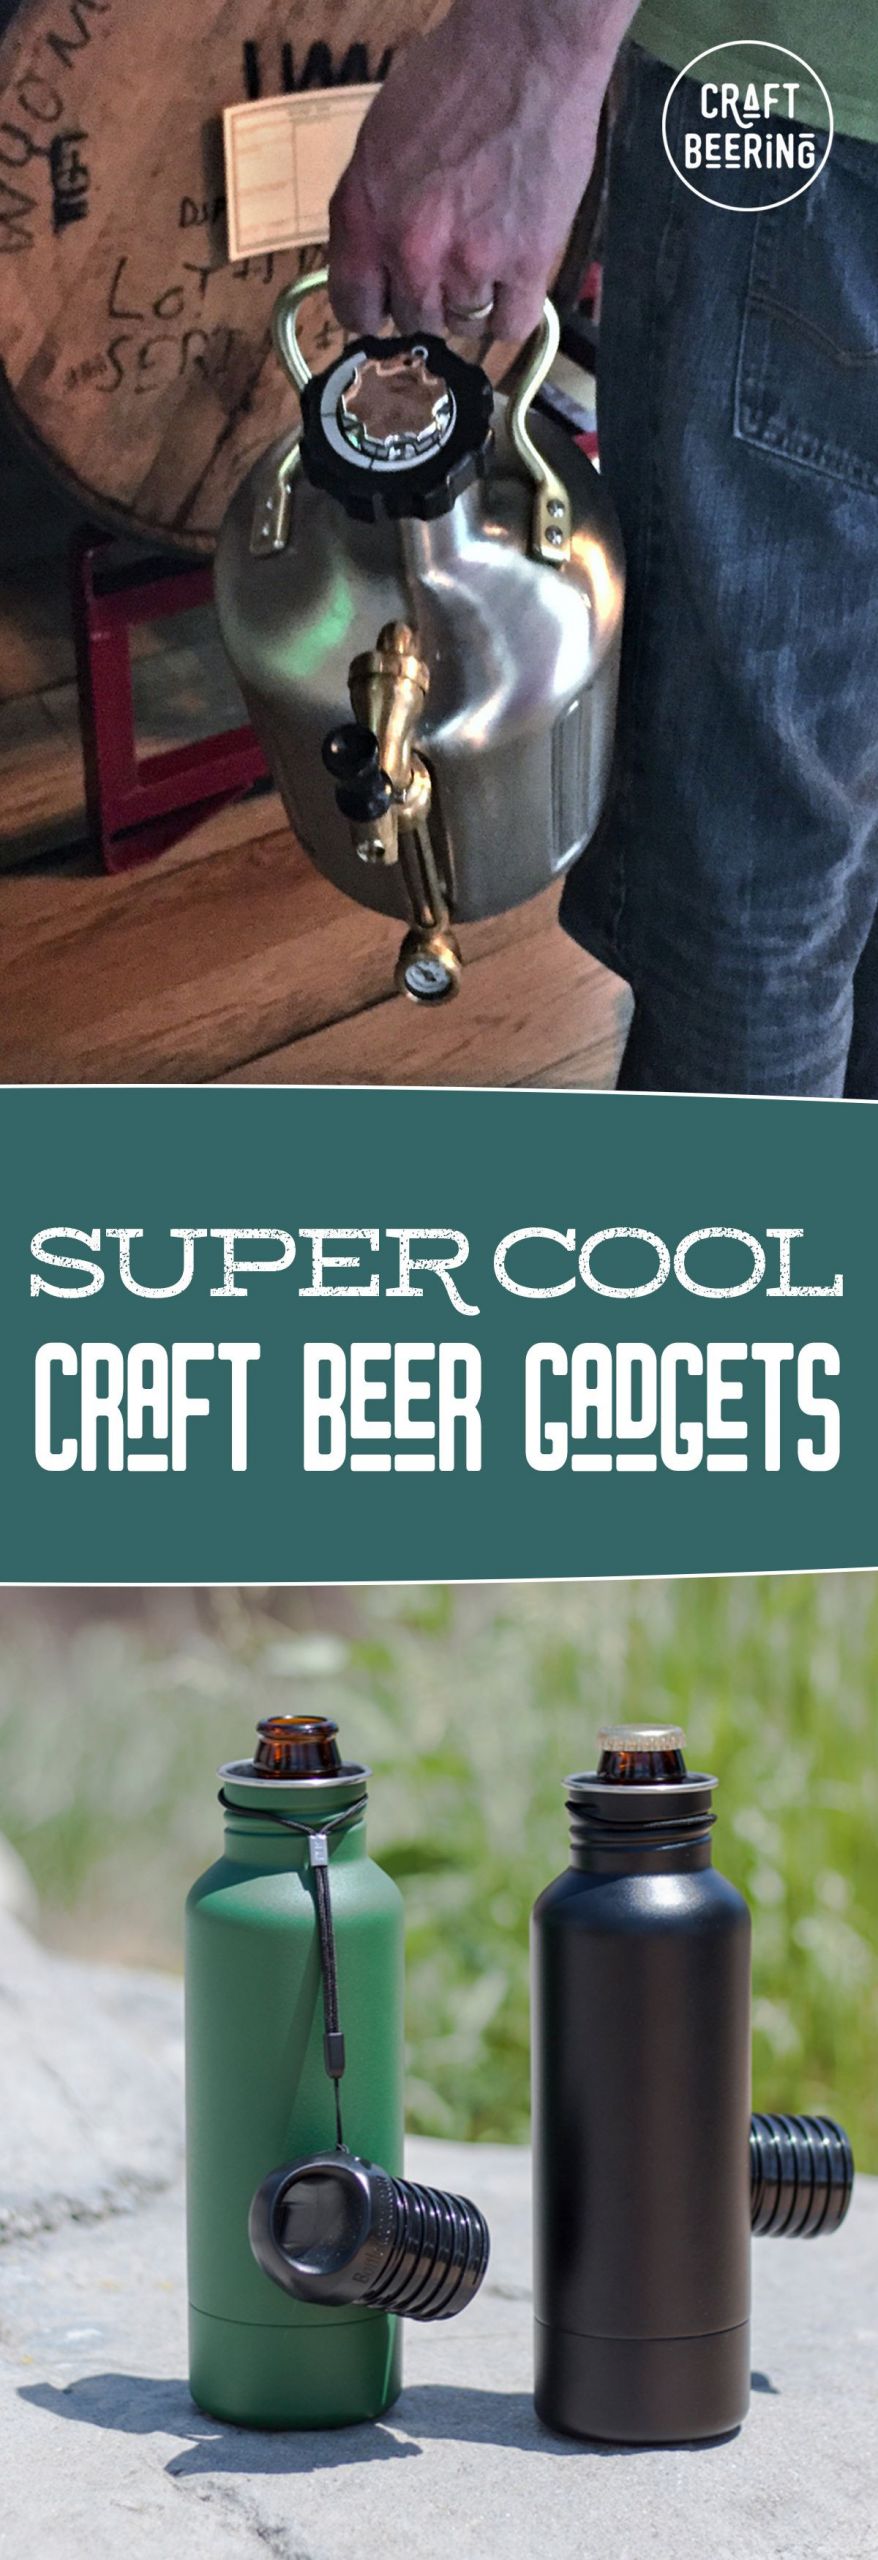 Craft Beer Gift Ideas
 Craft Beer Gifts a Hub for Ideas and Re mendations